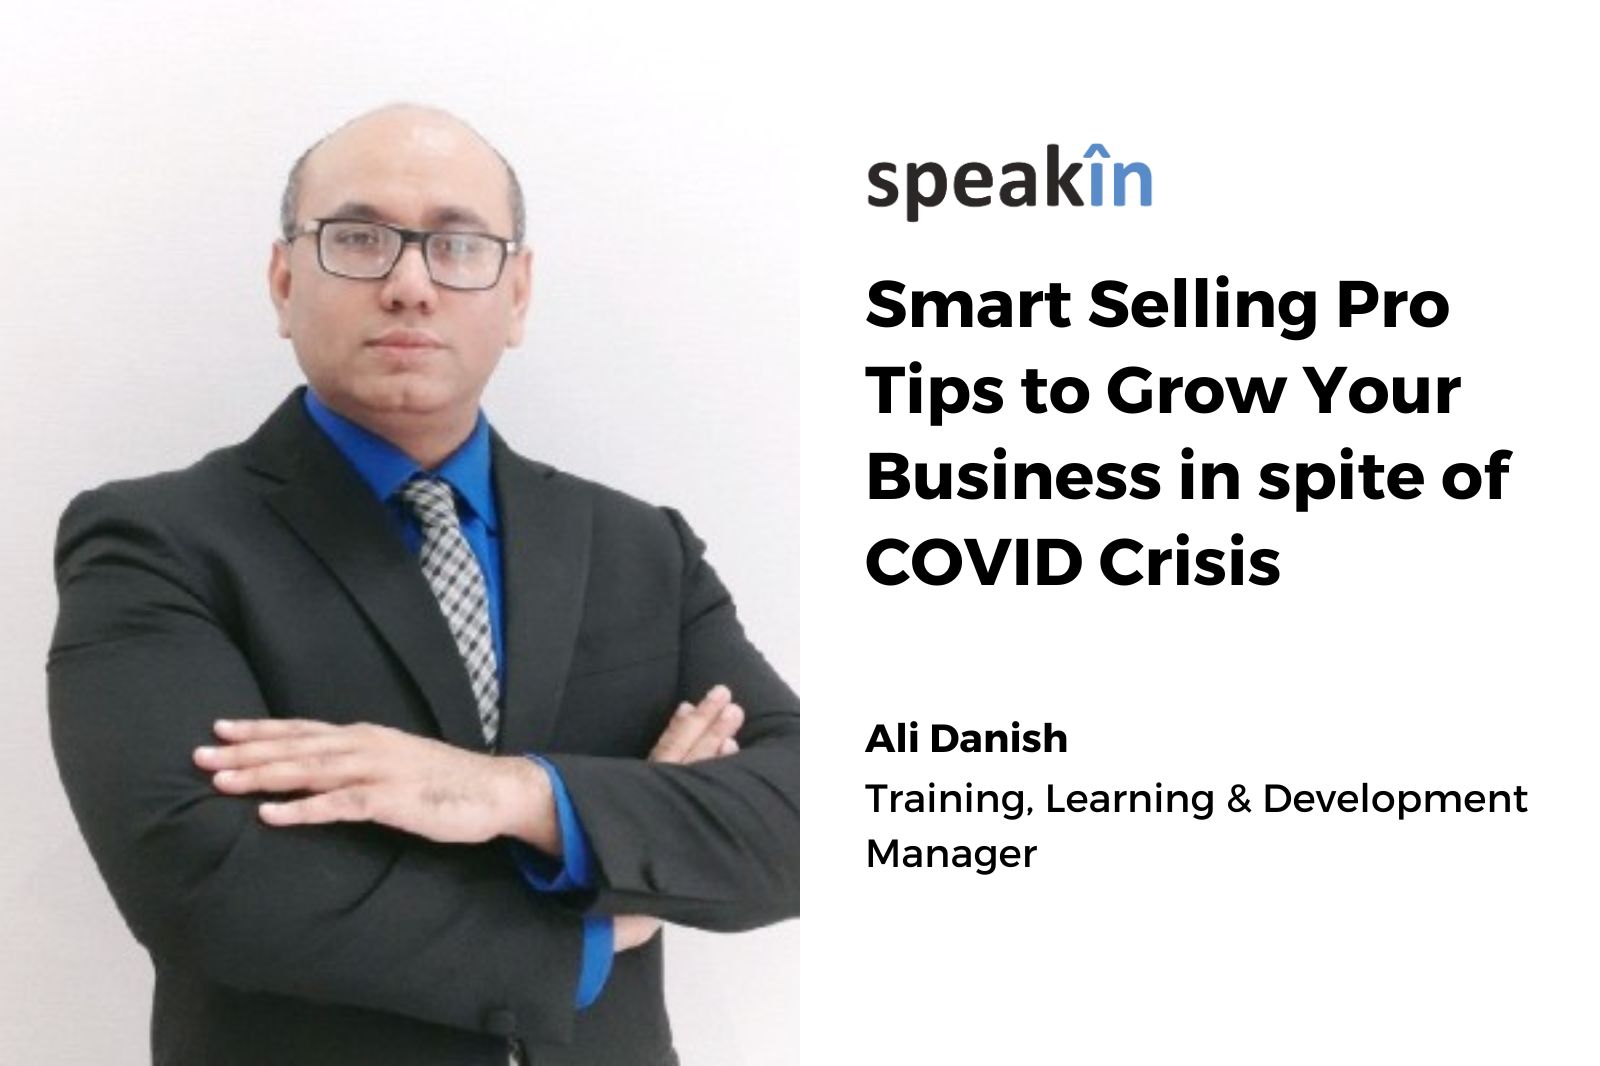 Smart Selling Pro Tips to Grow Your Business in spite of COVID Crisis